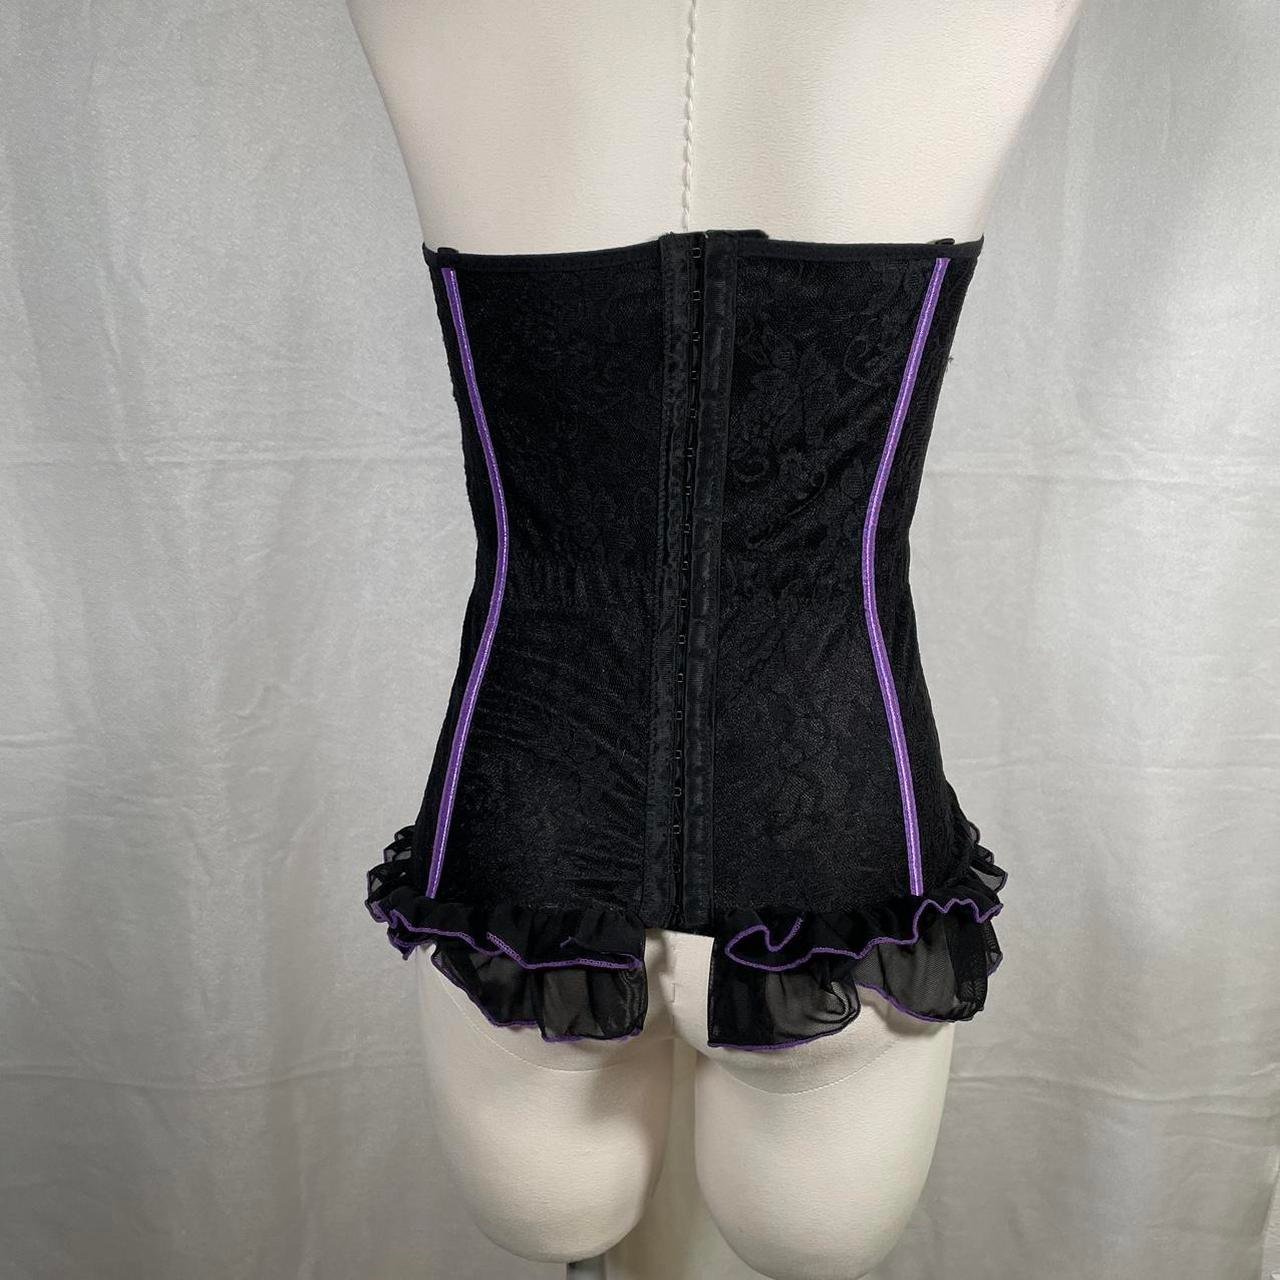 cheapest place to buy  Play Boy Inspired Corset Purple kszUfLF9r just for you